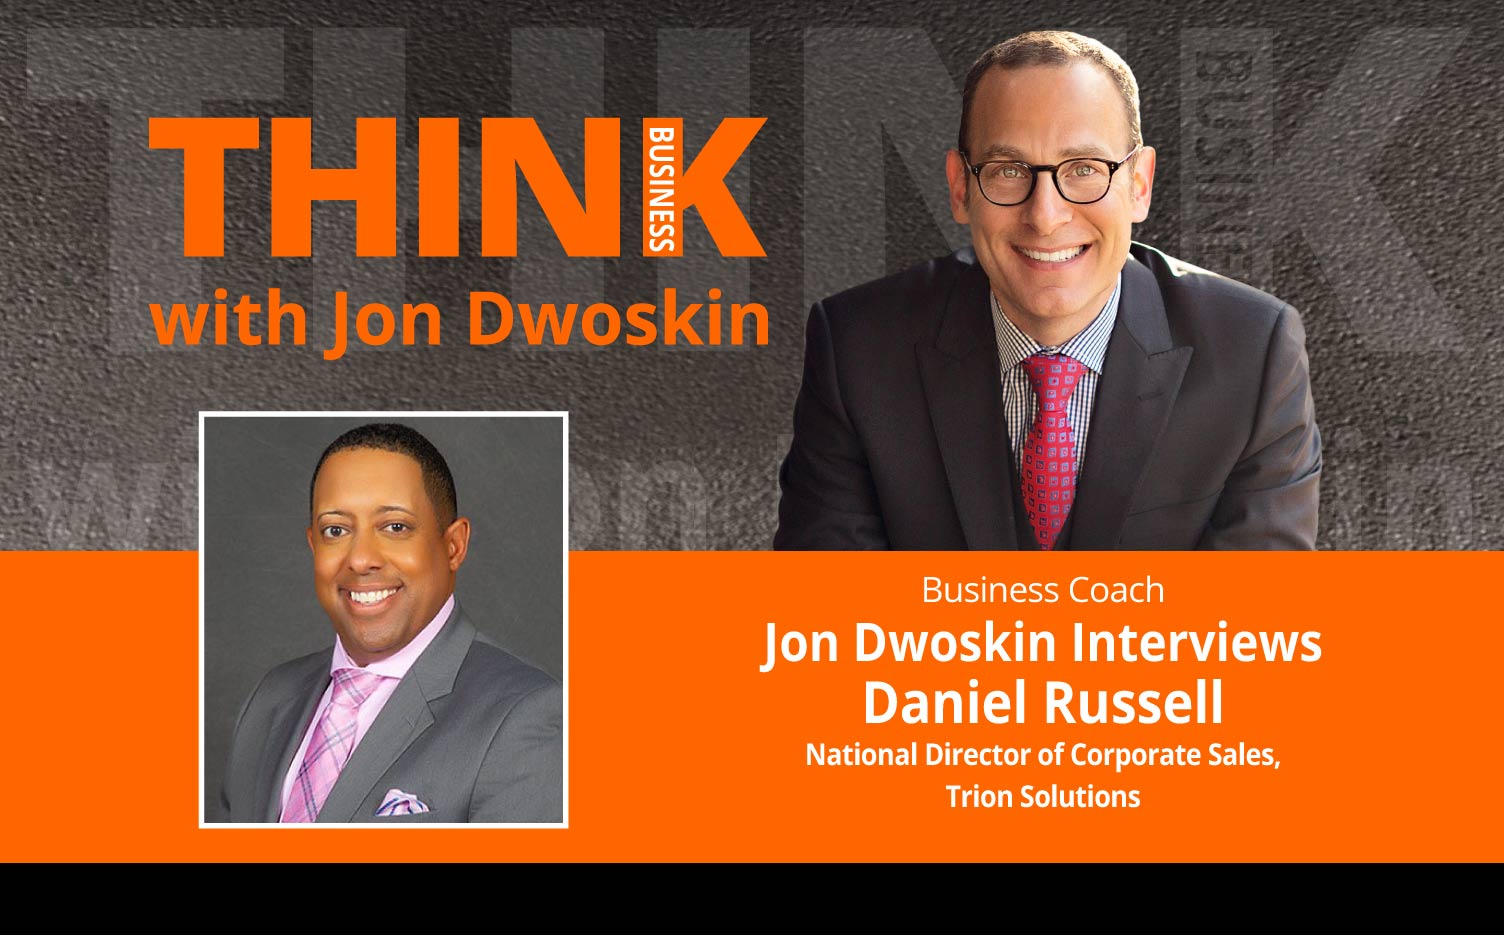 THINK Business Podcast: Jon Dwoskin Interviews Daniel Russell, National Director of Corporate Sales, Trion Solutions